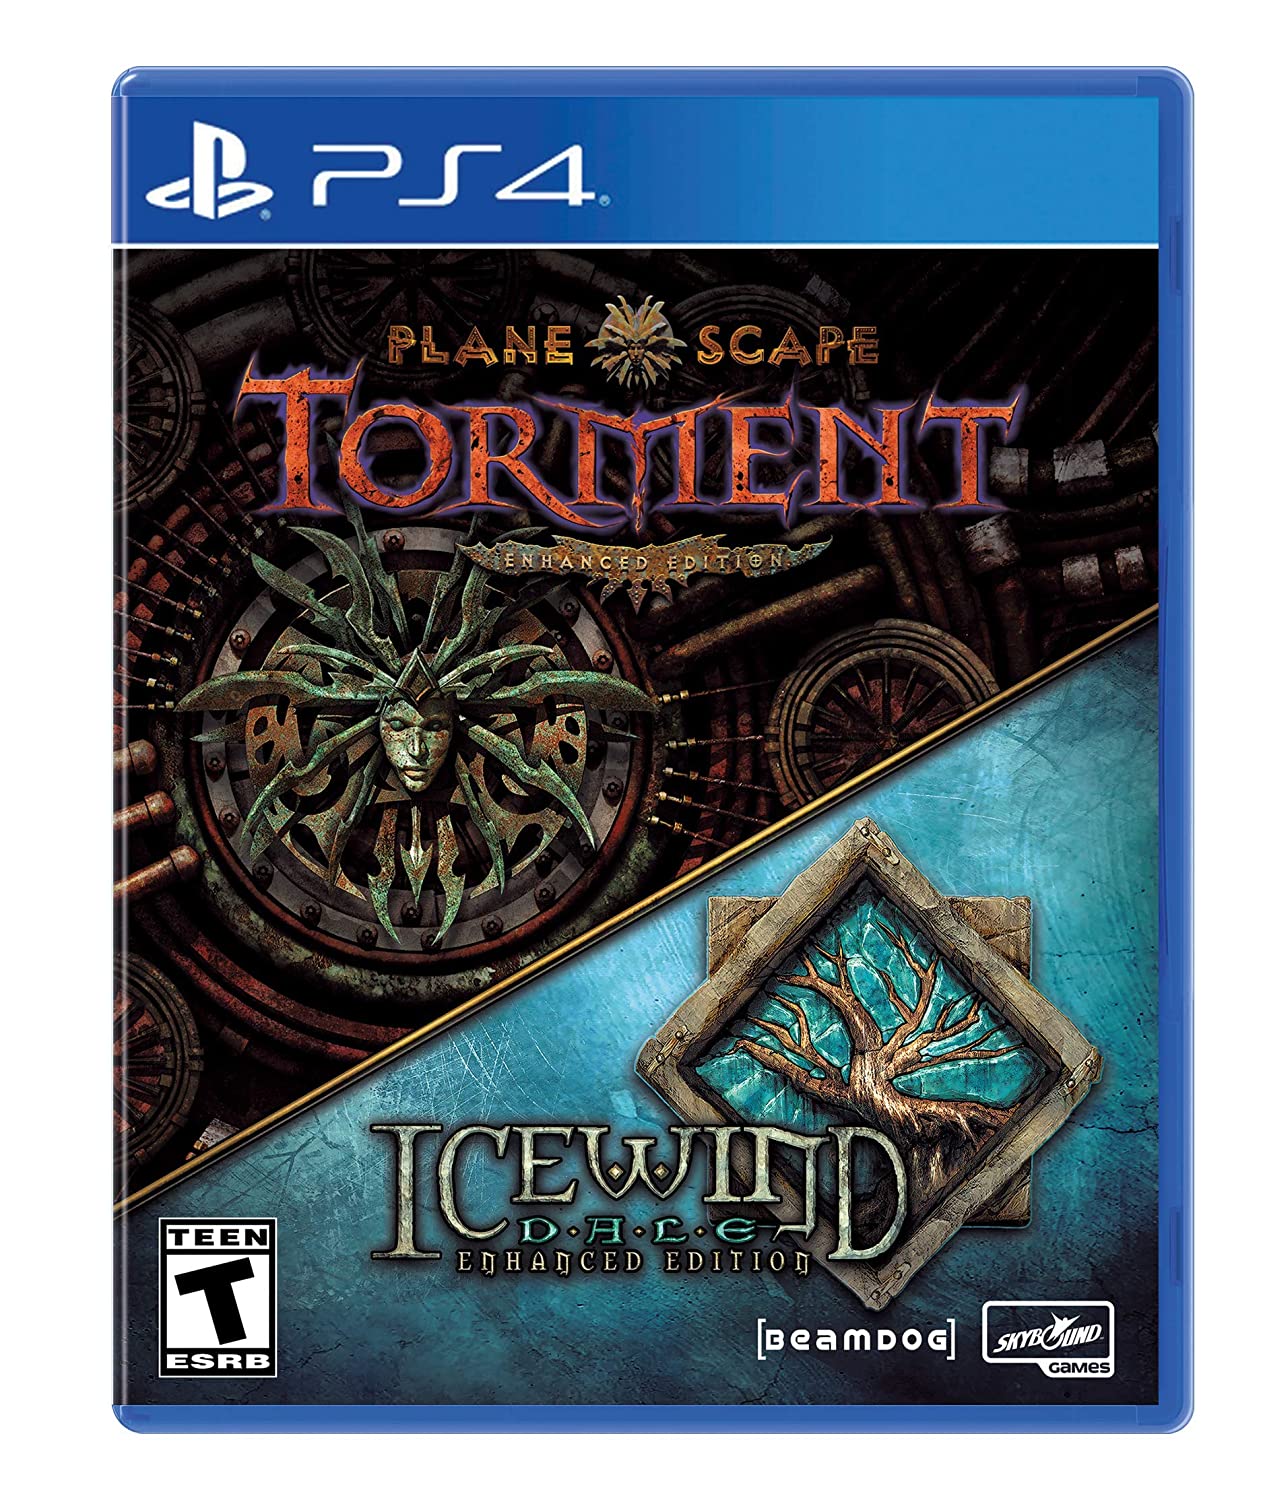 Planescape Torment & Icewind